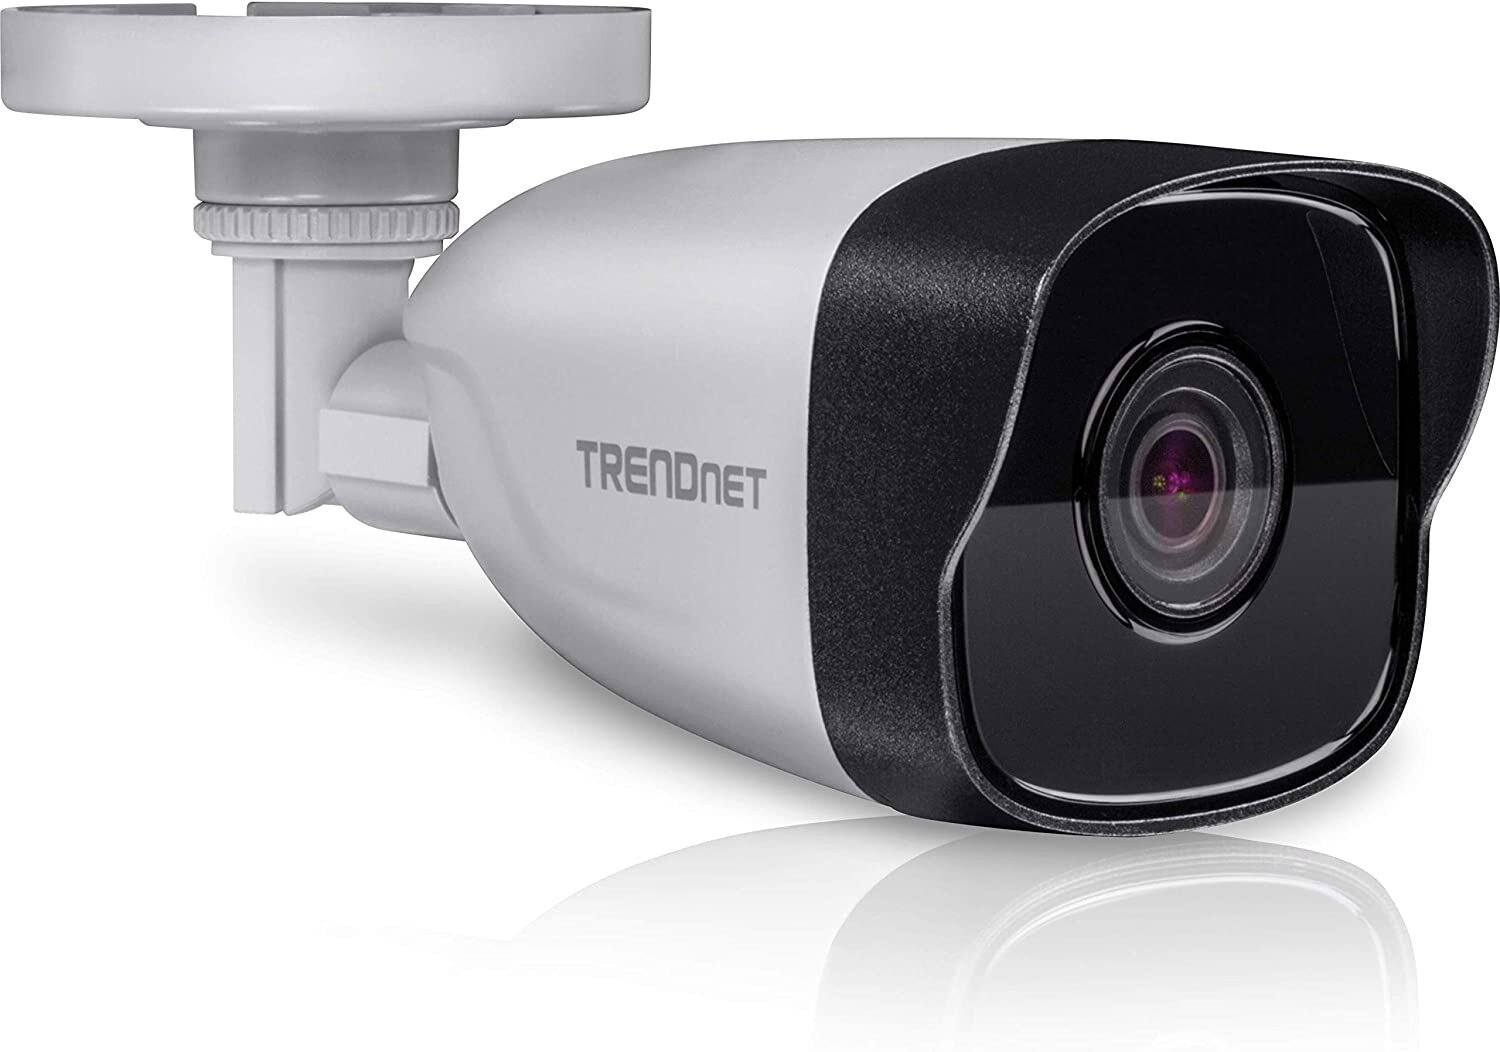 A display of TrenDnet Best Network Camera for security and surveillance in color black and gray